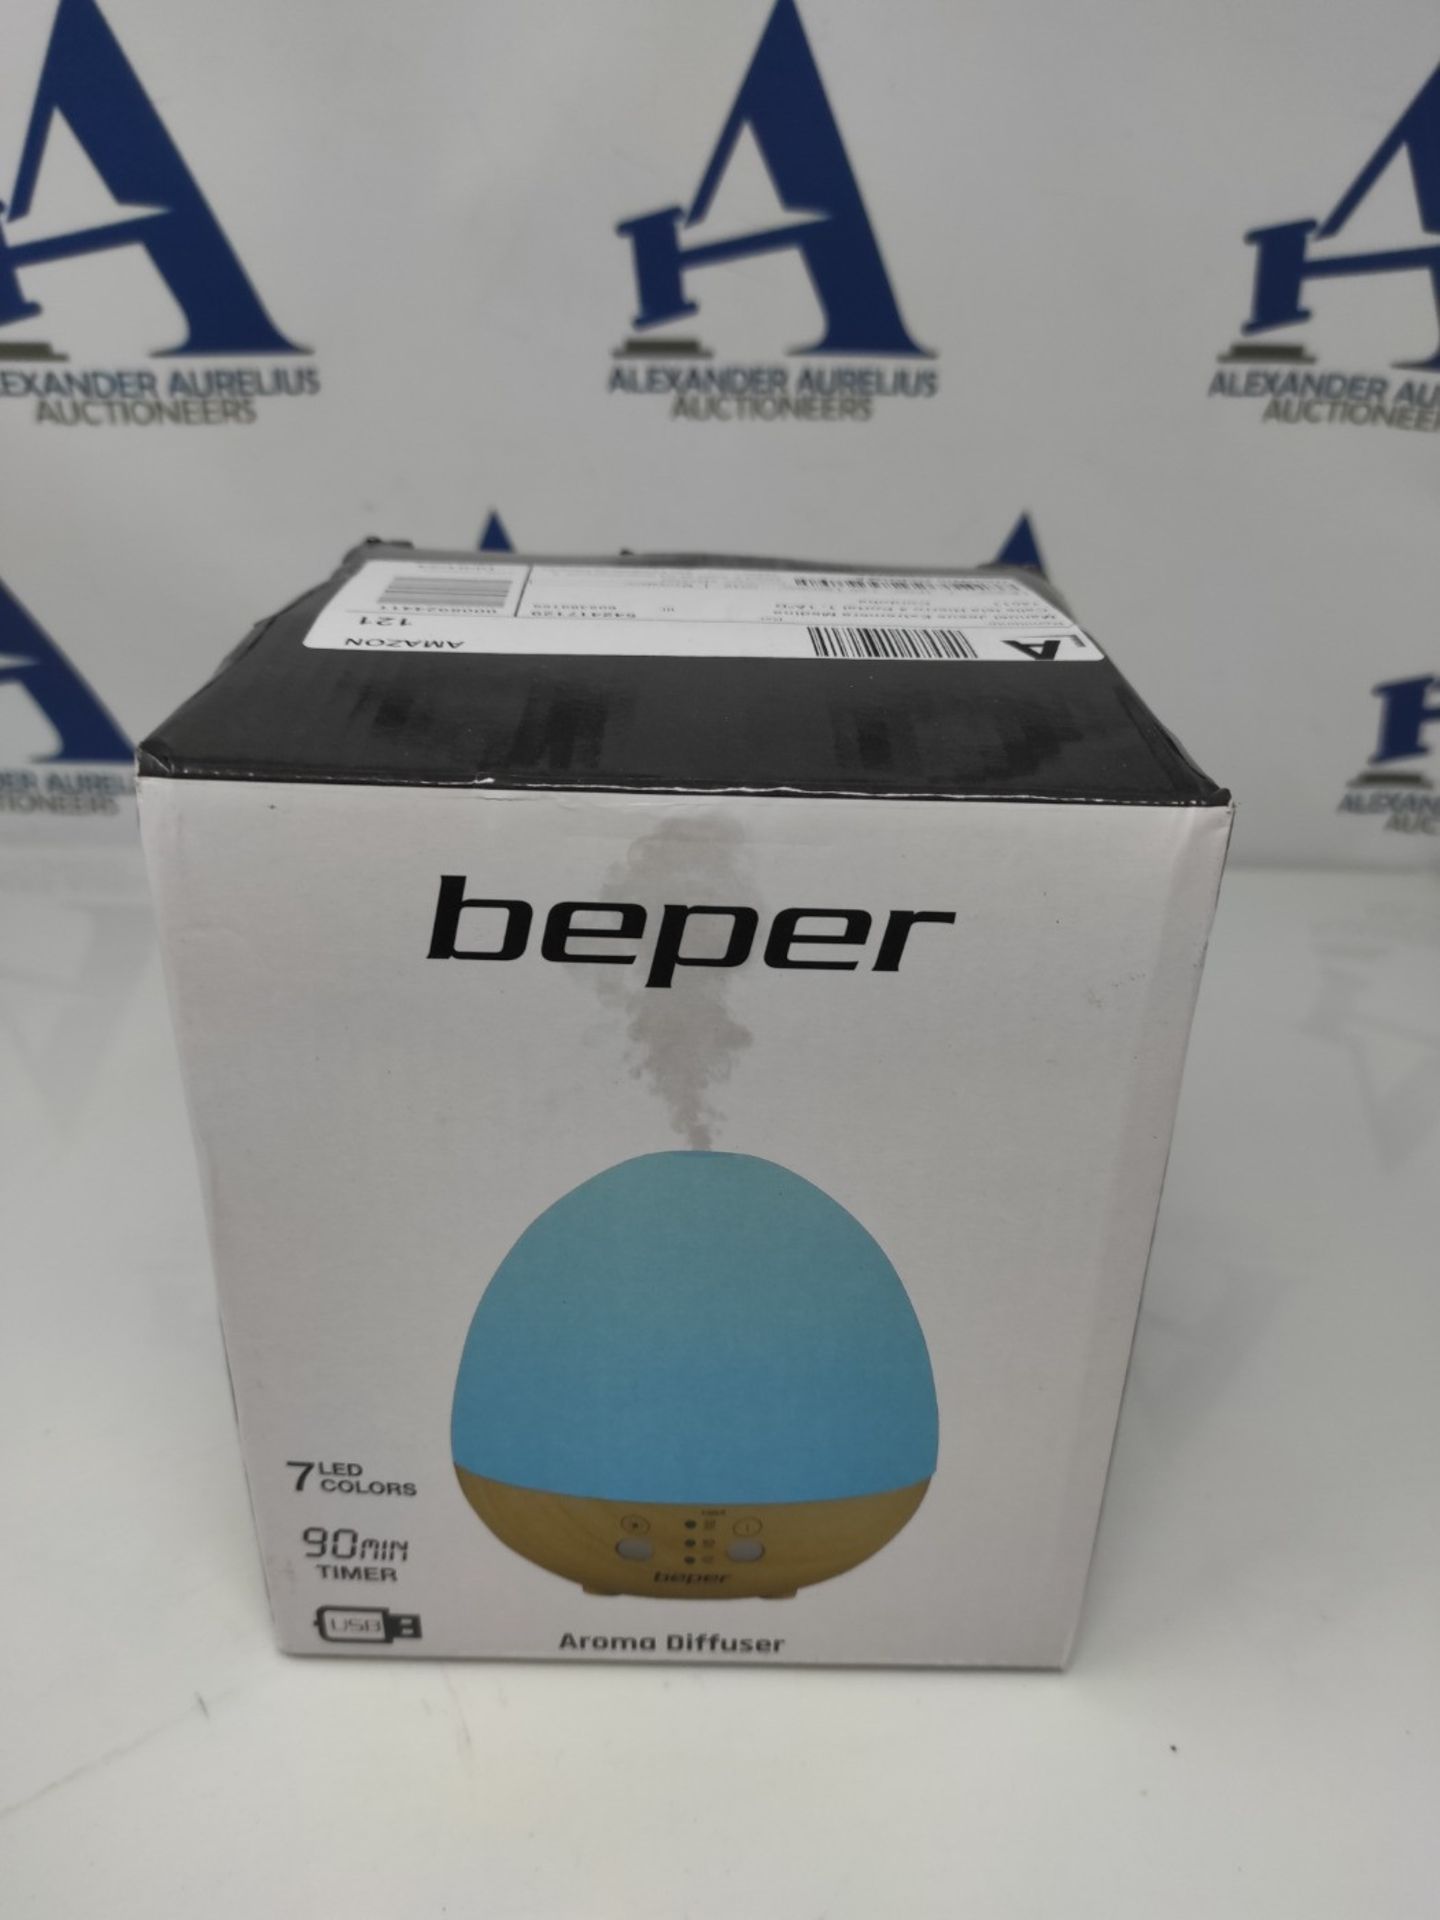 BEPER P205DIF001 Essential Oils Diffuser, Aroma Diffuser, 5 W, Ultrasonic Technology, - Image 2 of 3